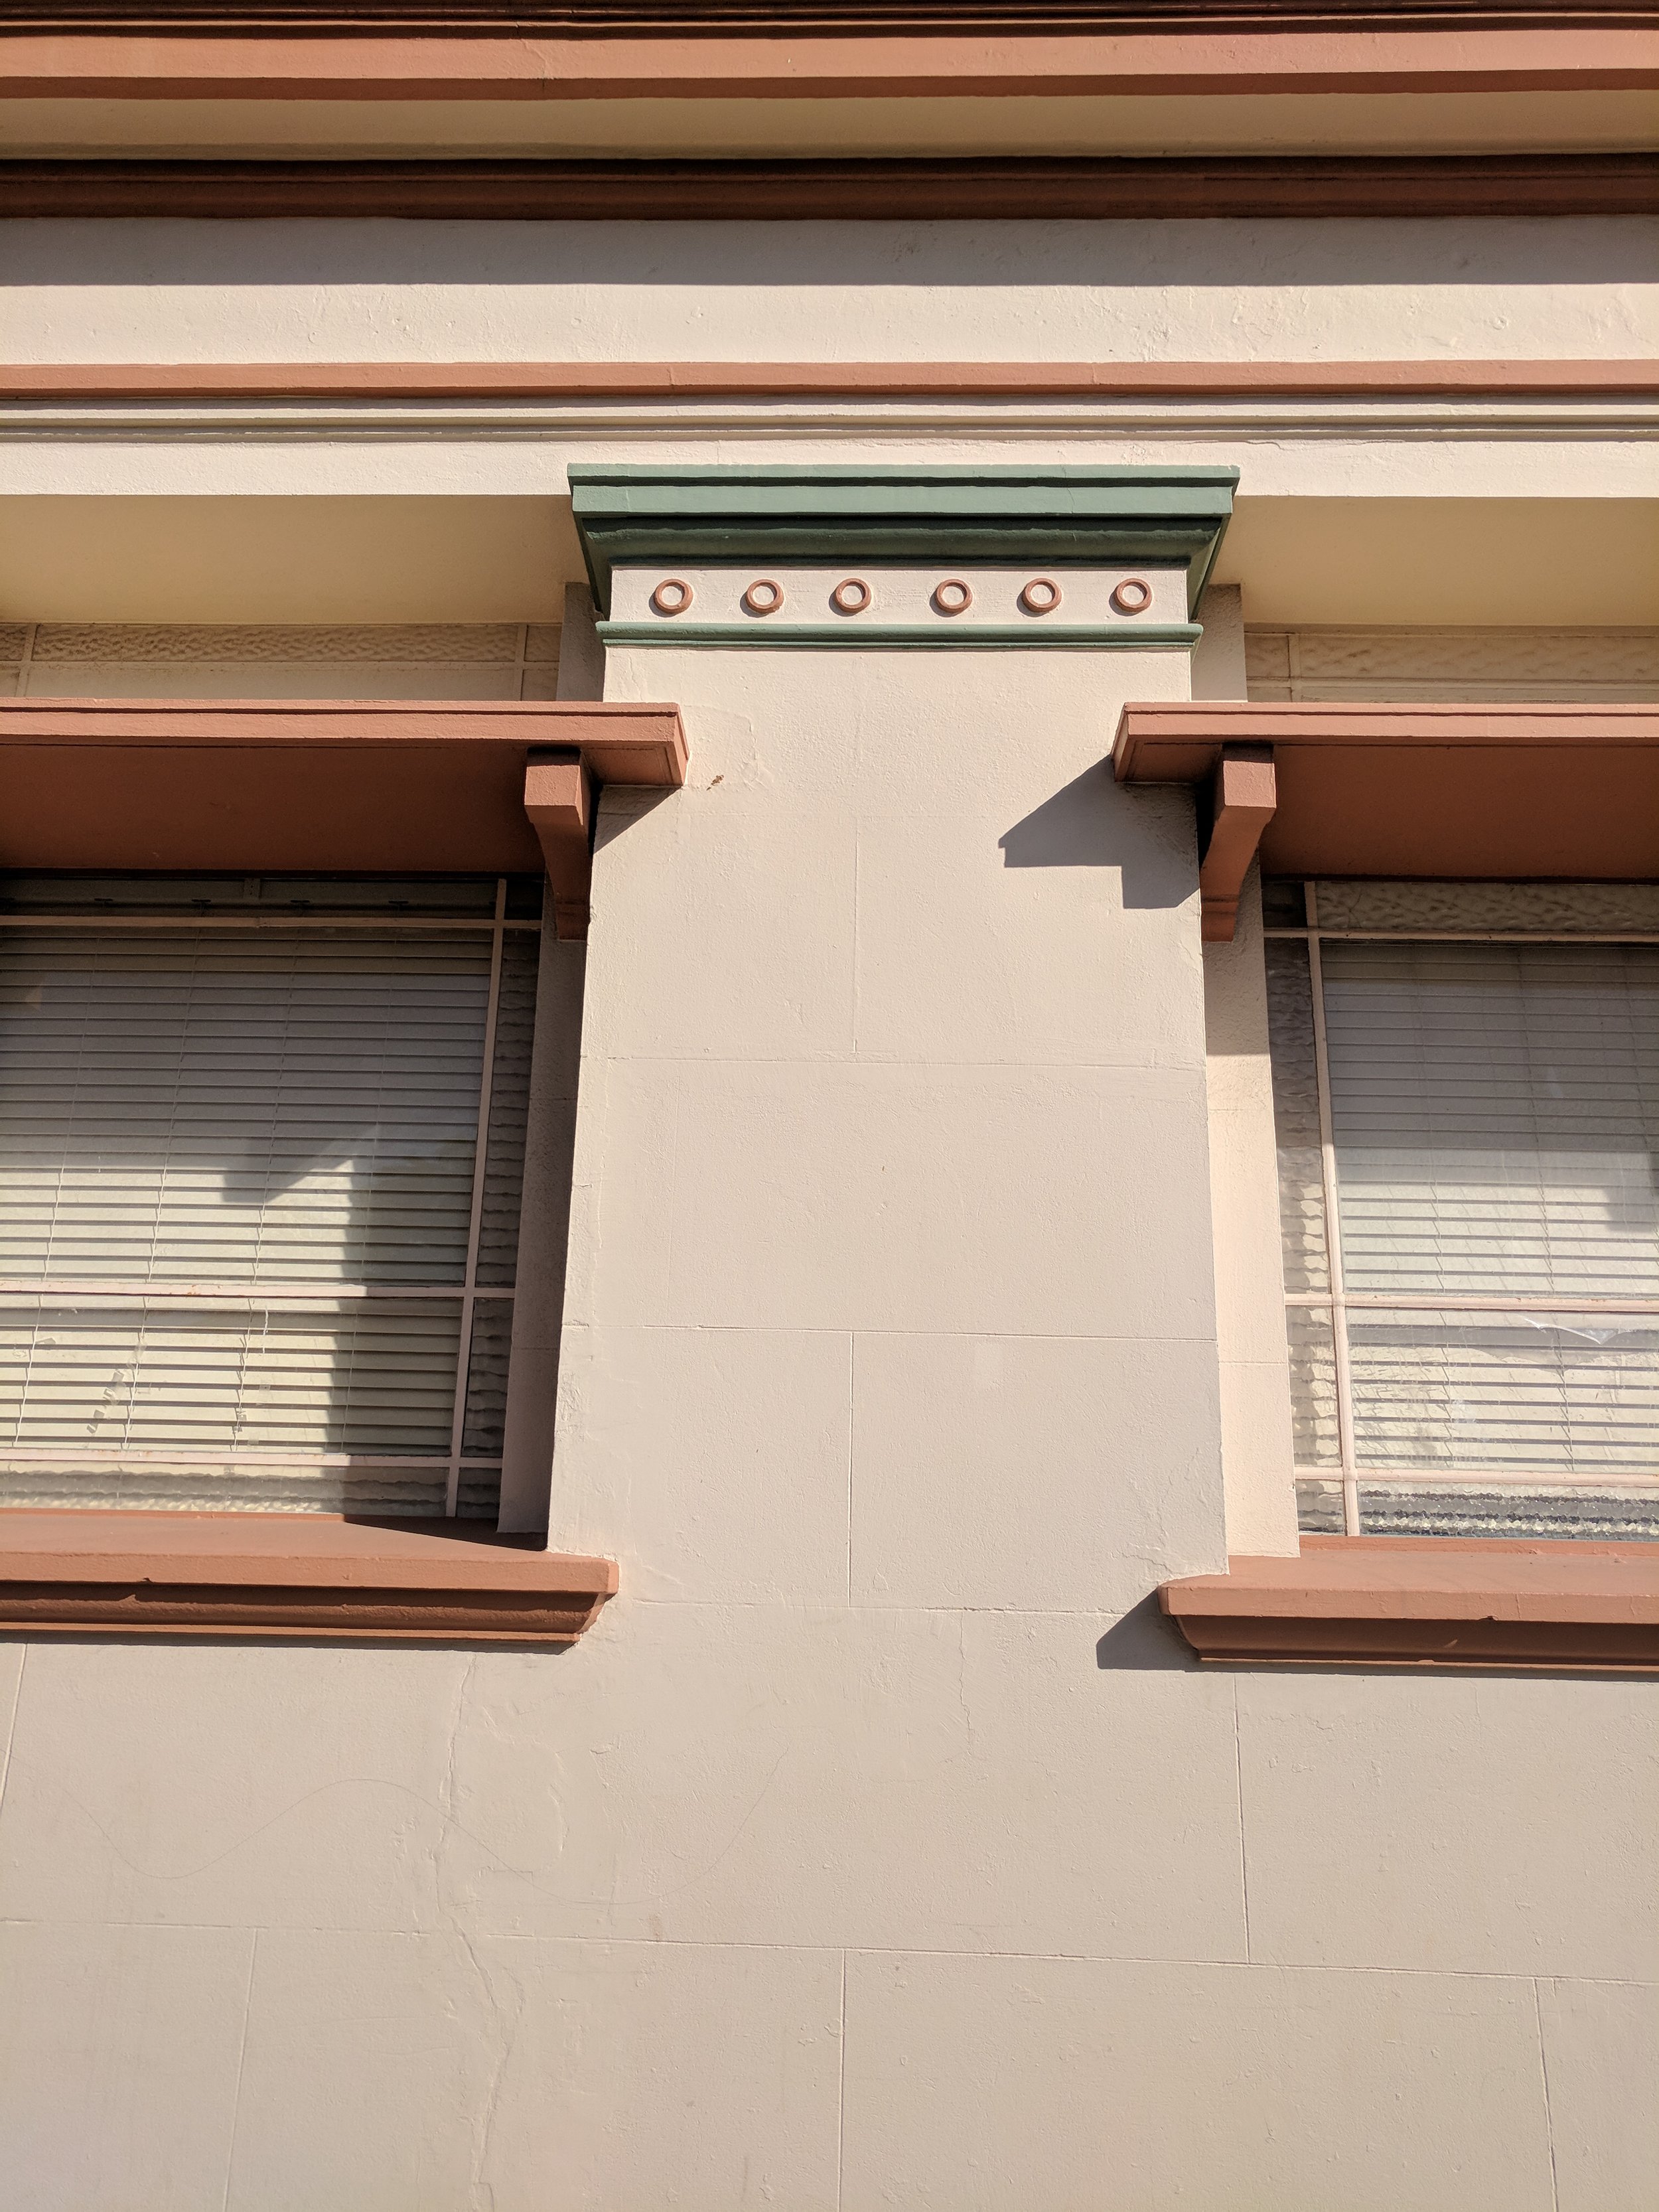 Facade Ornamentation, the old commonwealth bank